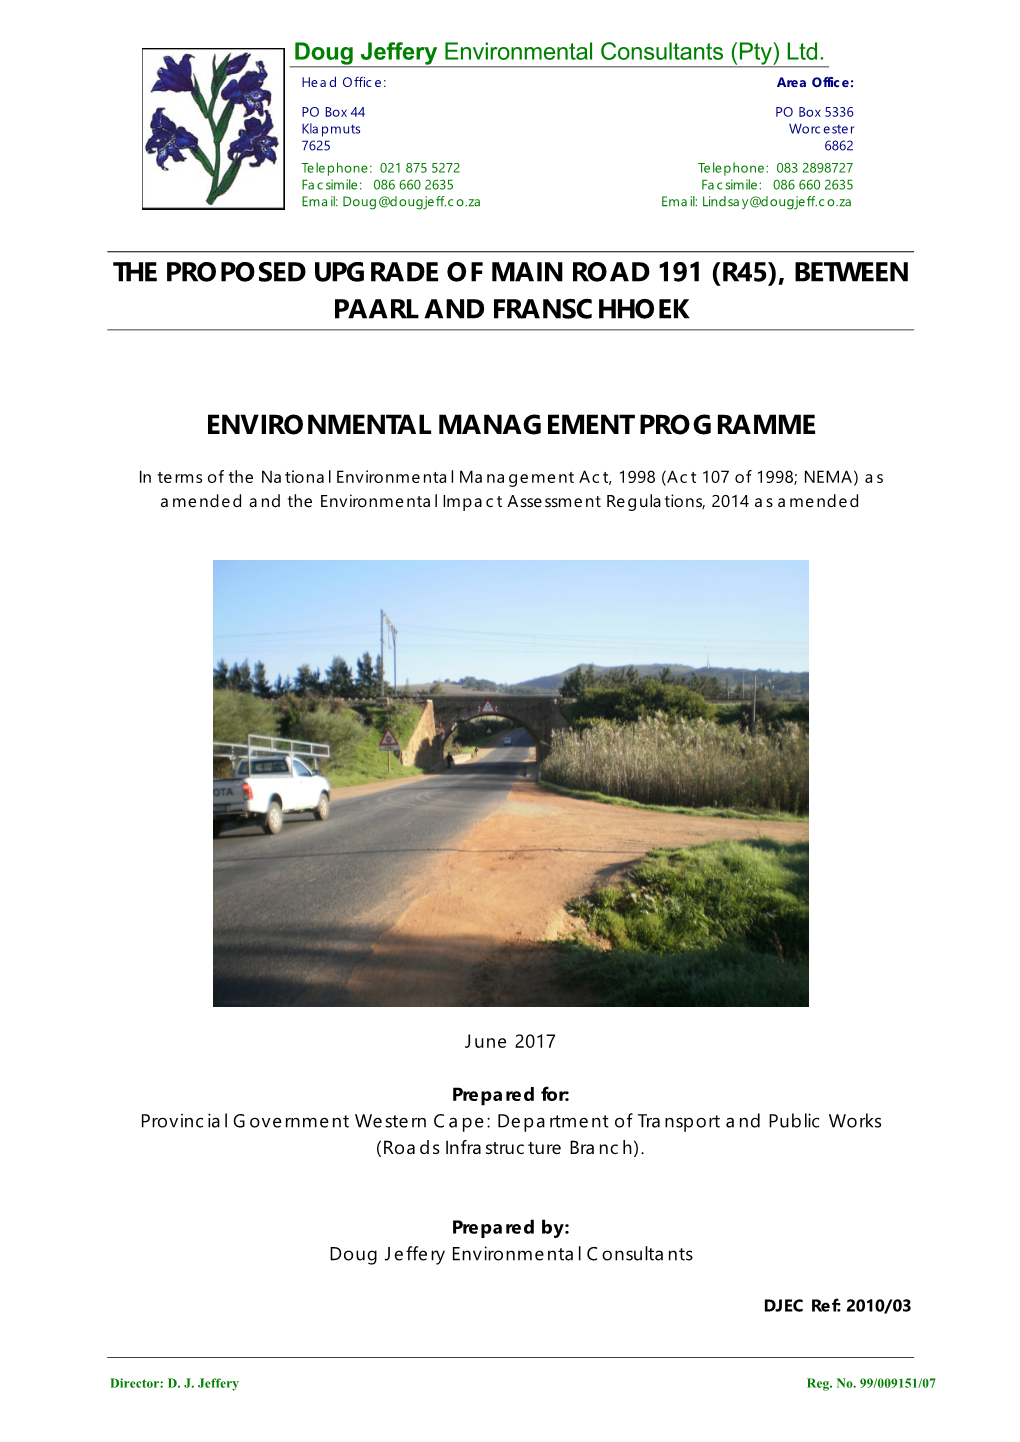 The Proposed Upgrade of Main Road 191 (R45), Between Paarl and Franschhoek Environmental Management Programme